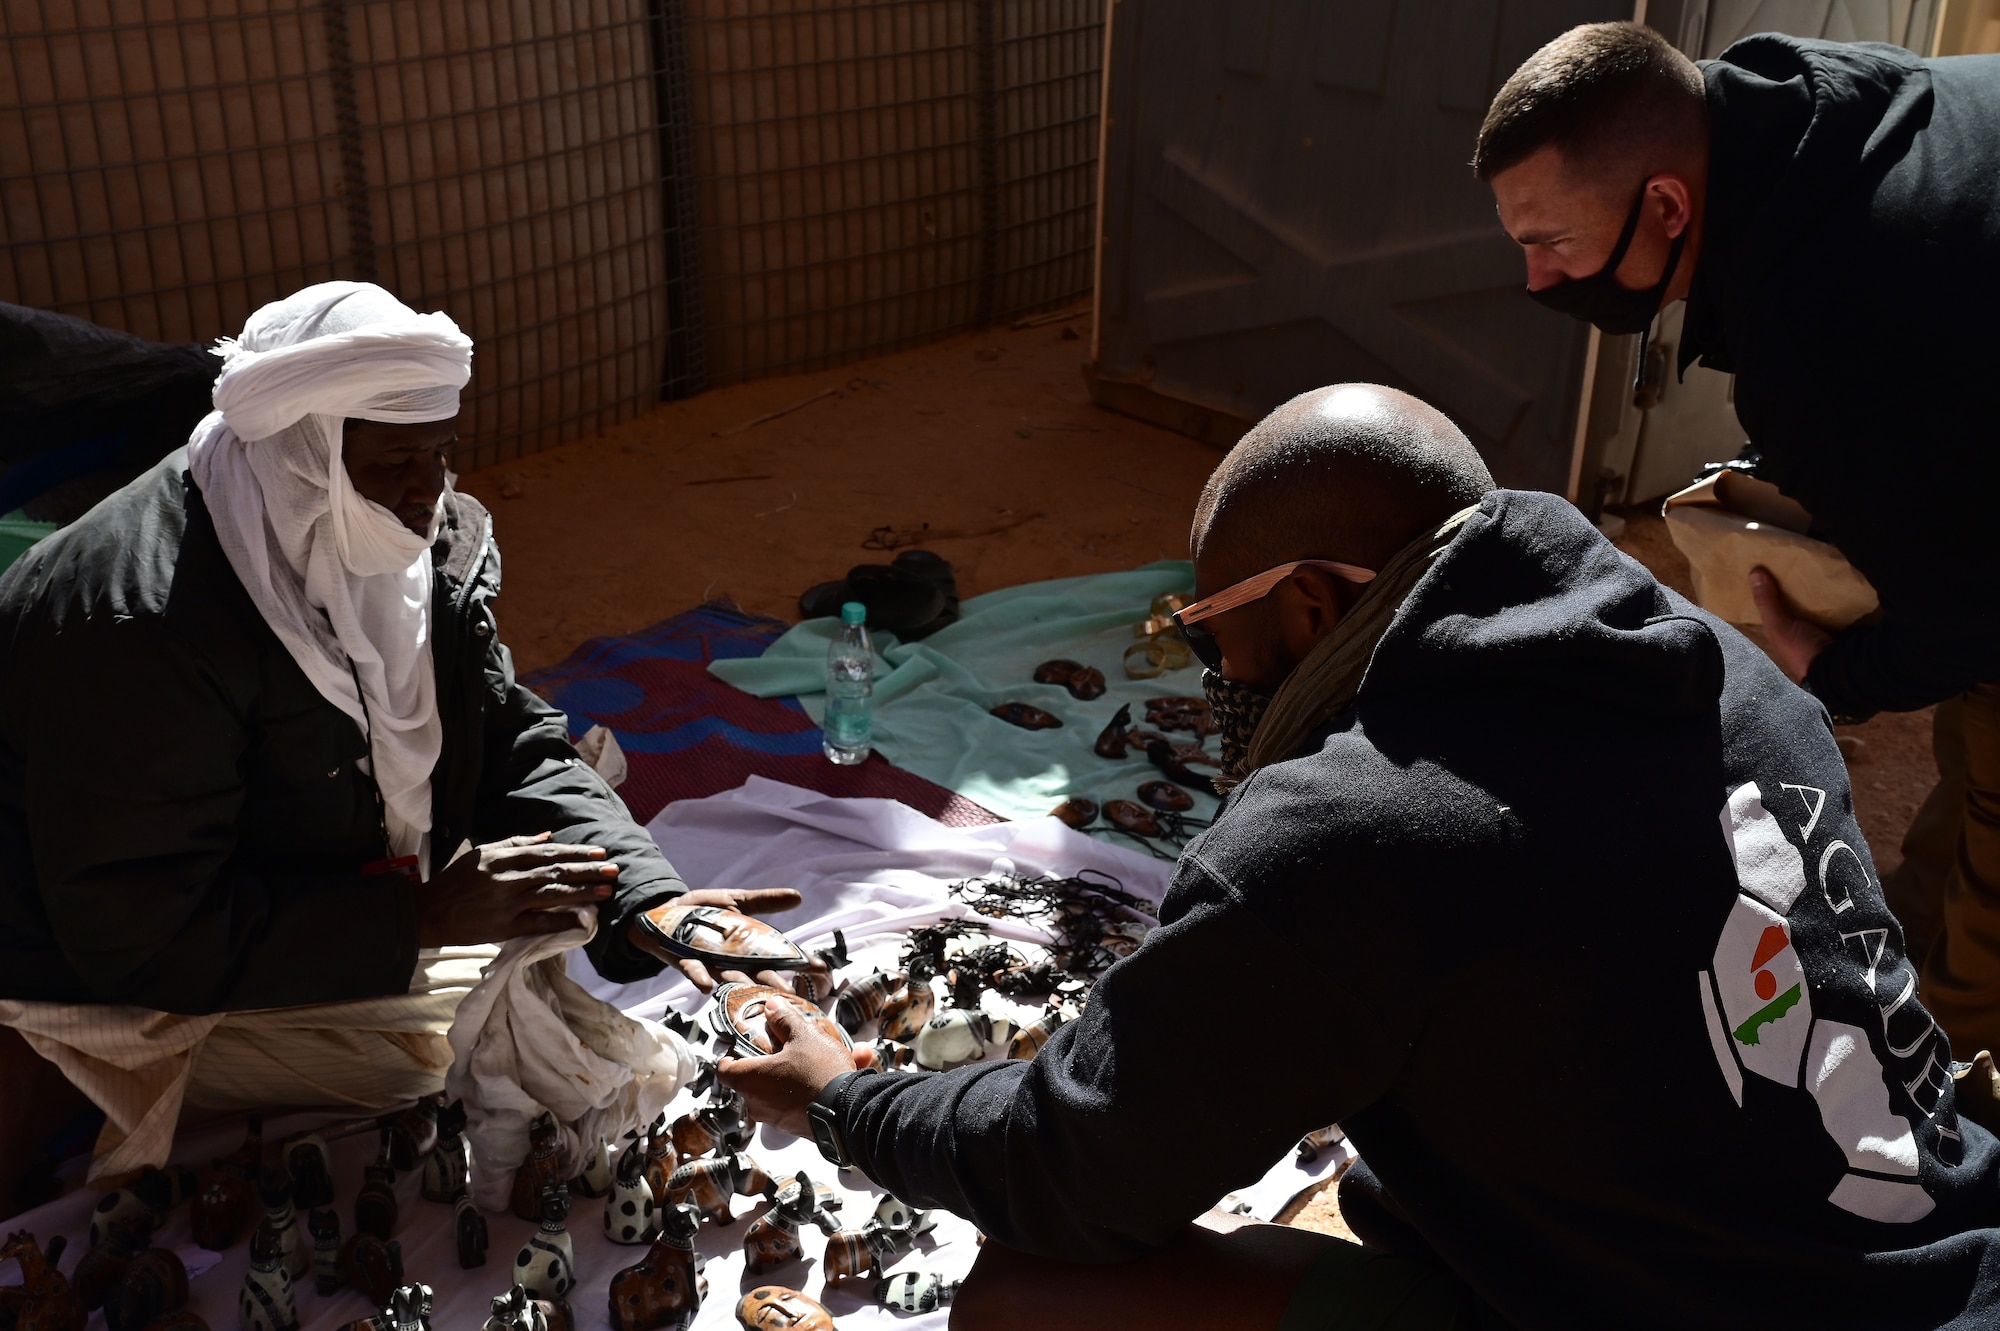 U.S. Service members shop during a bazaar at Nigerien Air Base 201, Agadez, Niger, Feb. 27, 2022. U.S. service members purchased approximately 10,532,000 West African CFA francs ($18K USD) worth of goods during the bazaar. Events like these enhance U.S., Niger relationships and stimulate local economic development. (U.S. Air Force photo by Tech. Sgt. Stephanie Longoria)